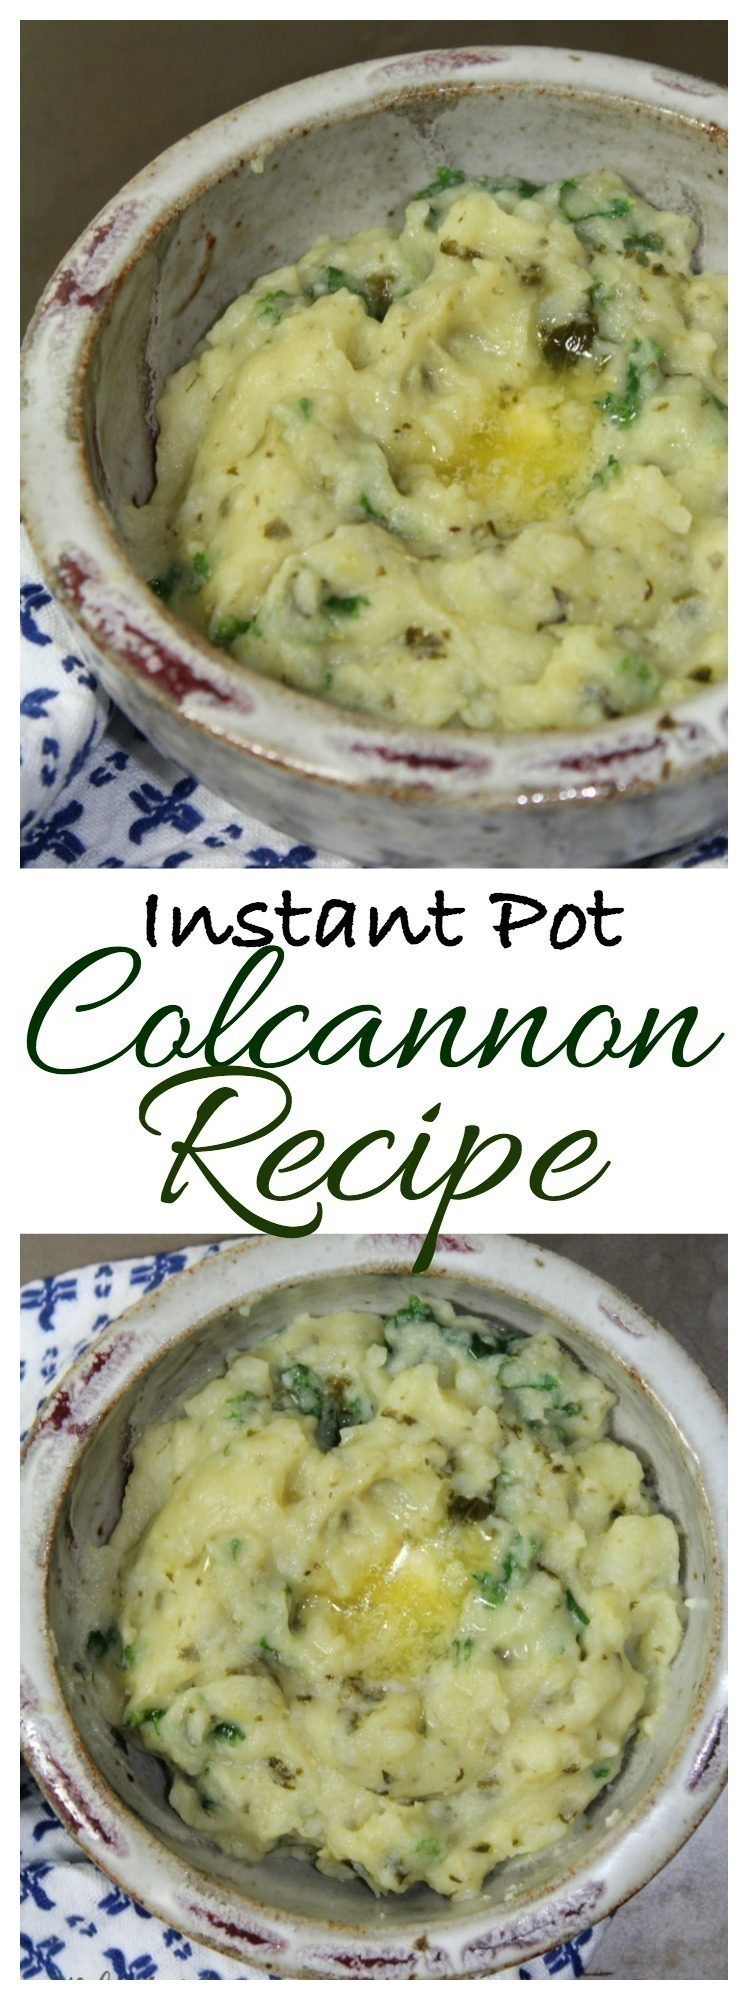 Combine potatoes with cream or milk, kale and cabbage and top with a knob of butter for delicious Irish Colcannon - made in minutes using your Instant Pot.